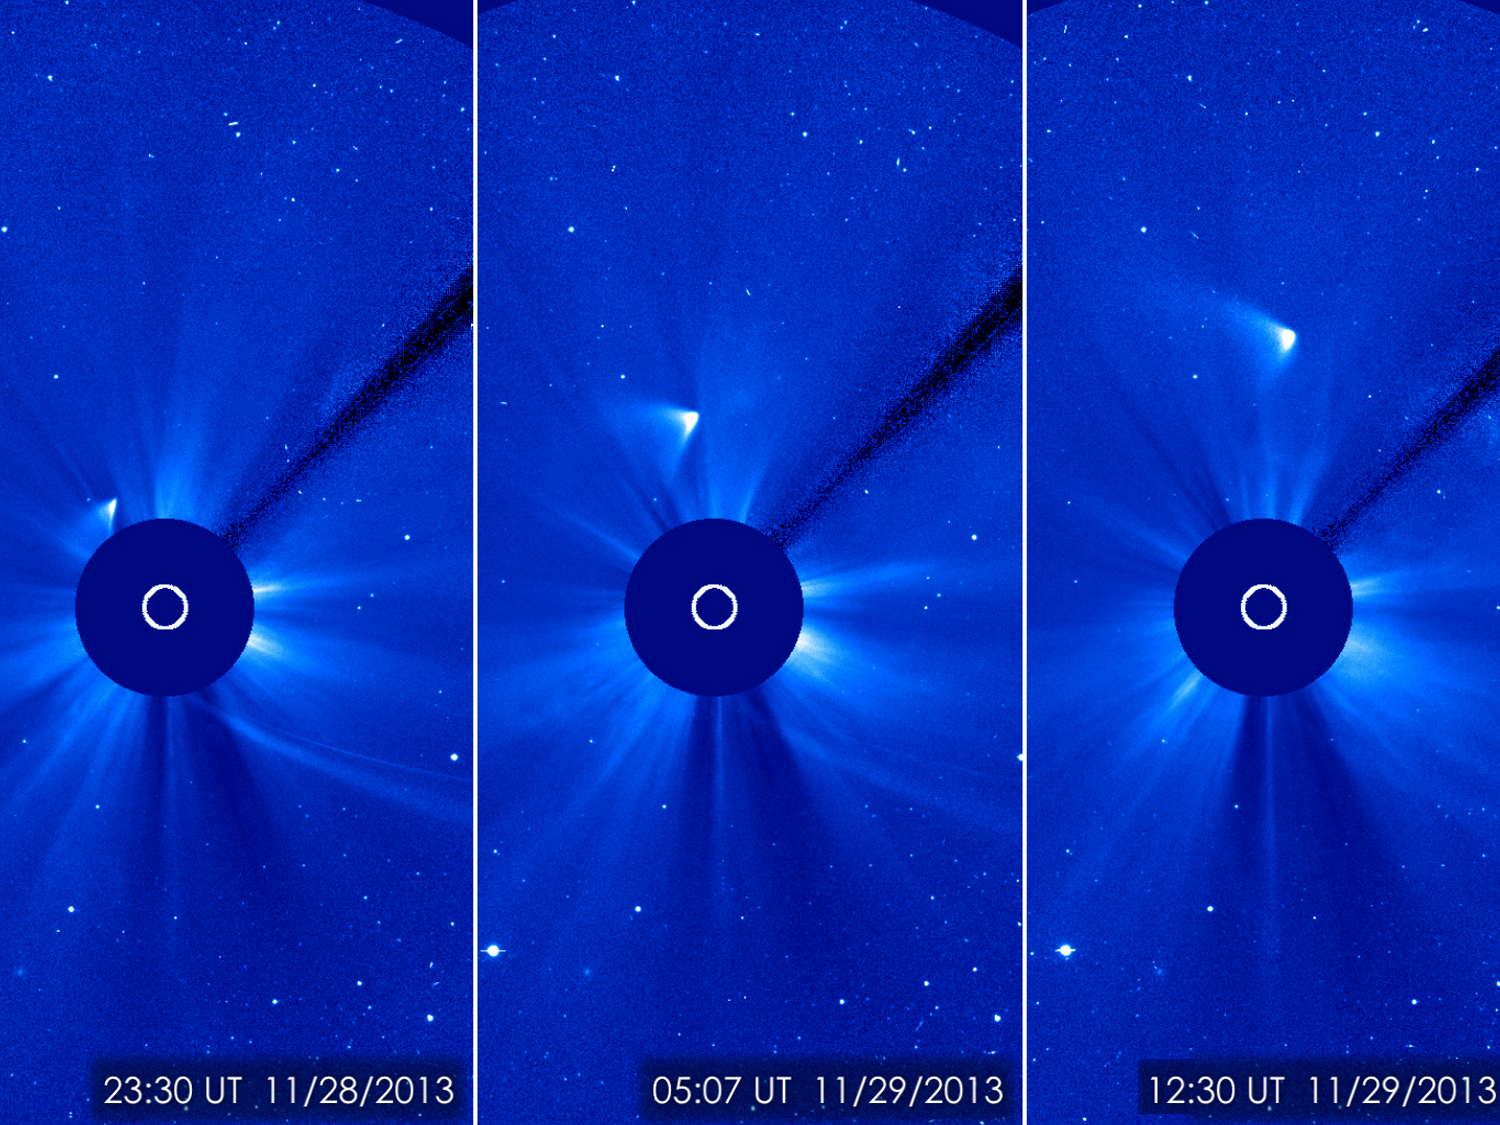 ISON appears as a white smear heading up and away from the sun. ISON was not visible during its closest approach to the sun, so many scientists thought it had disintegrated, but images like this one from the ESA/NASA Solar and Heliospheric Observatory suggest that a small nucleus may be intact.  Image and caption credit: ESA/NASA/SOHO/GSFC